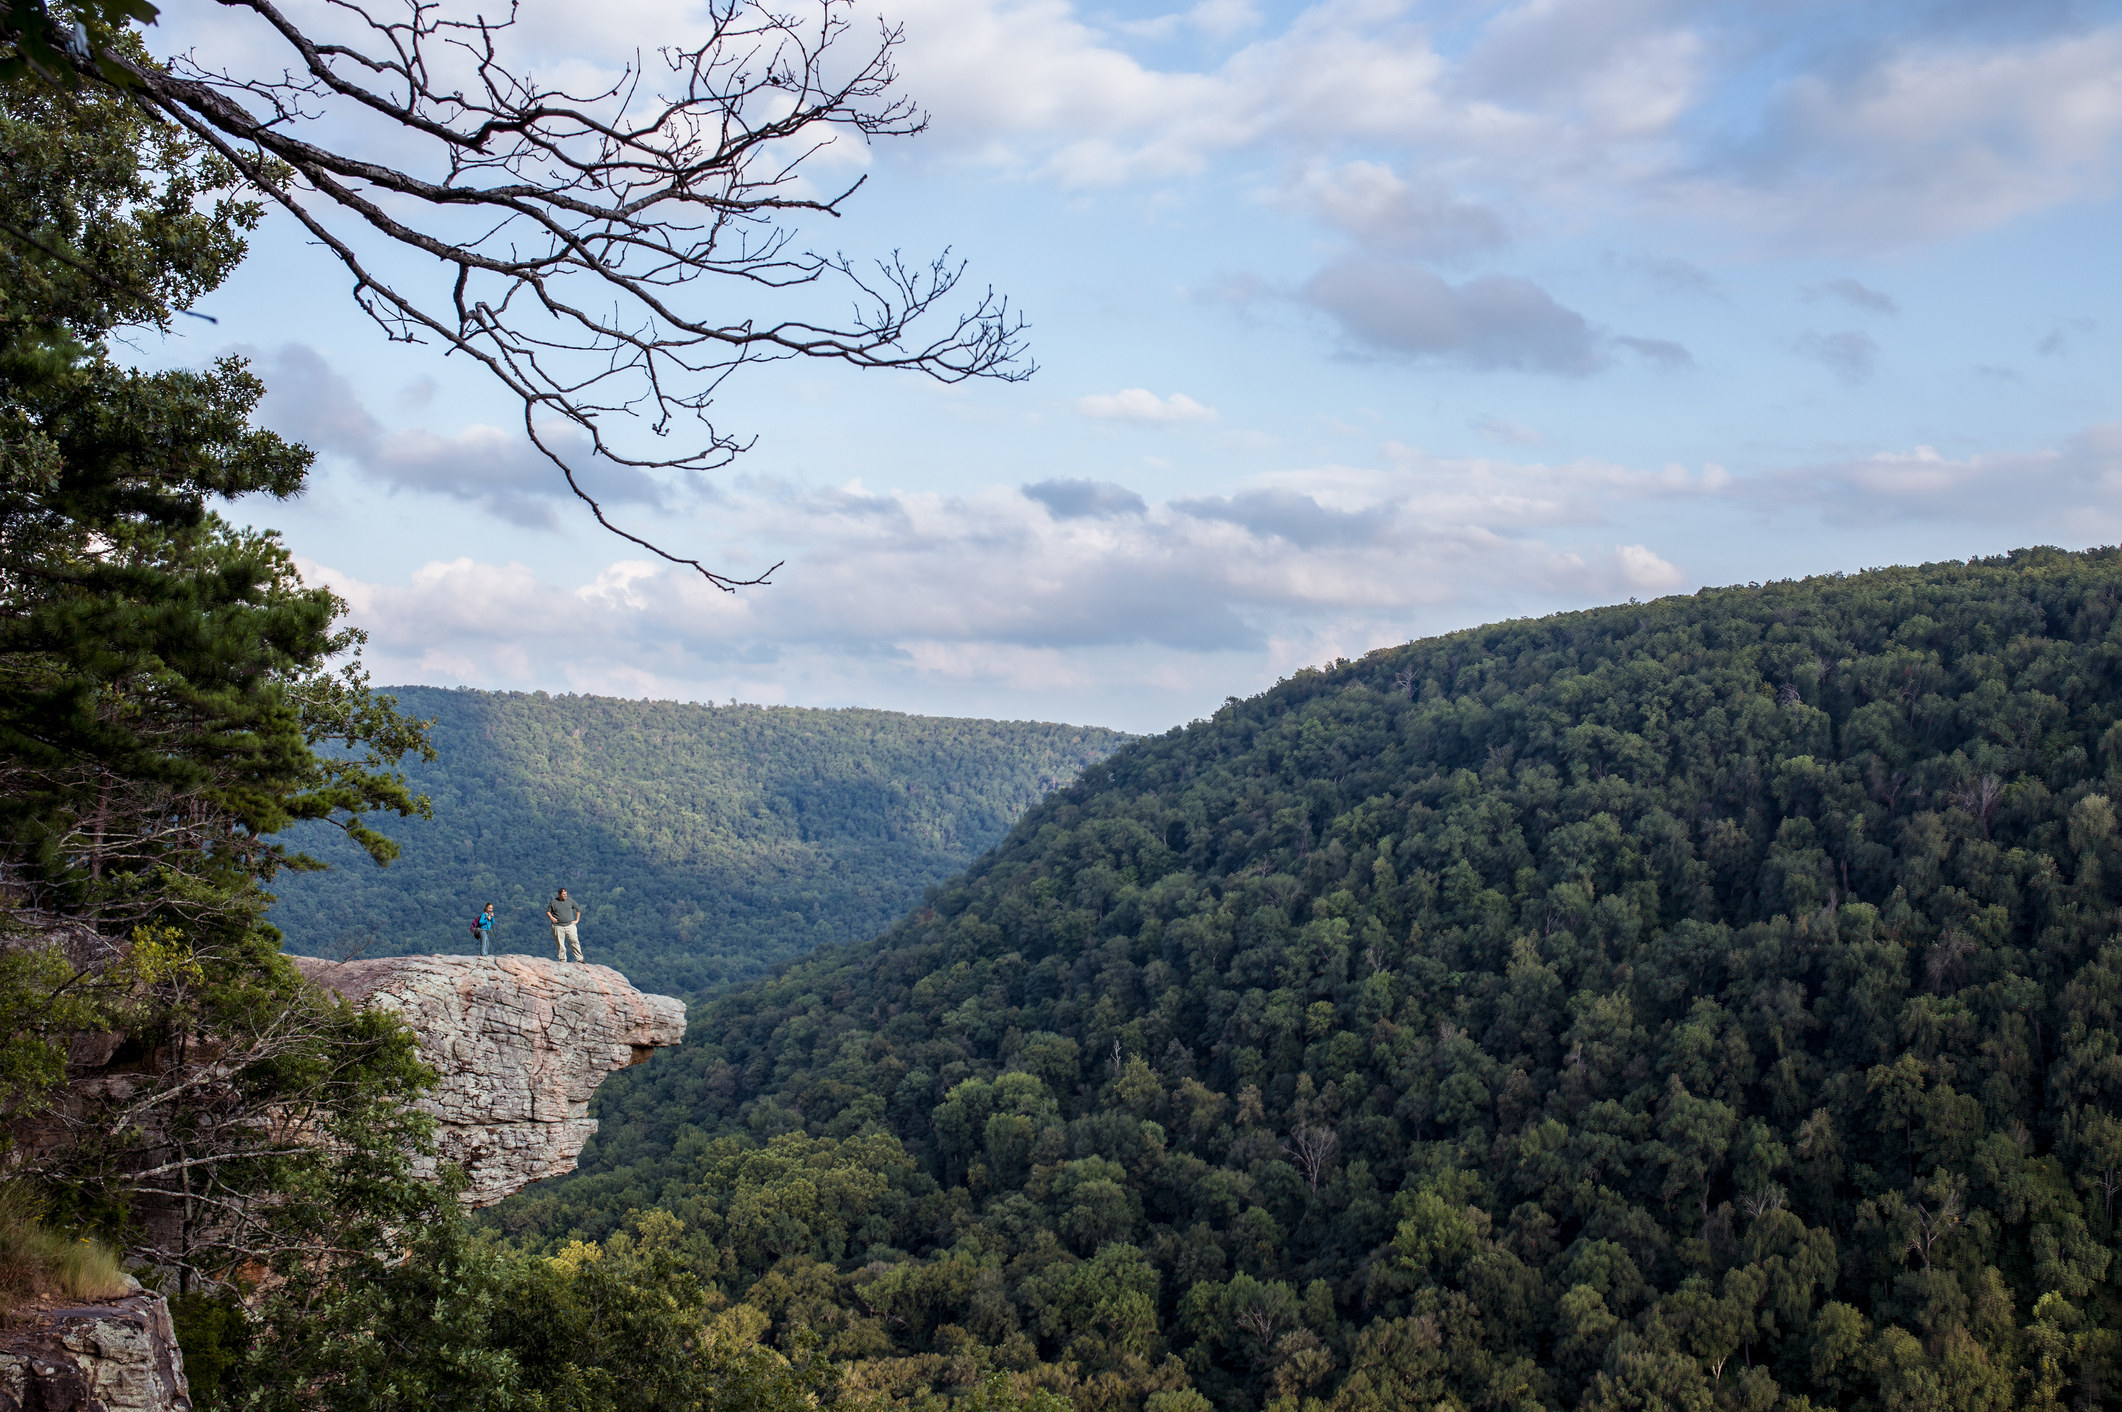 Two hikers stop to take in the view at Whitaker Point